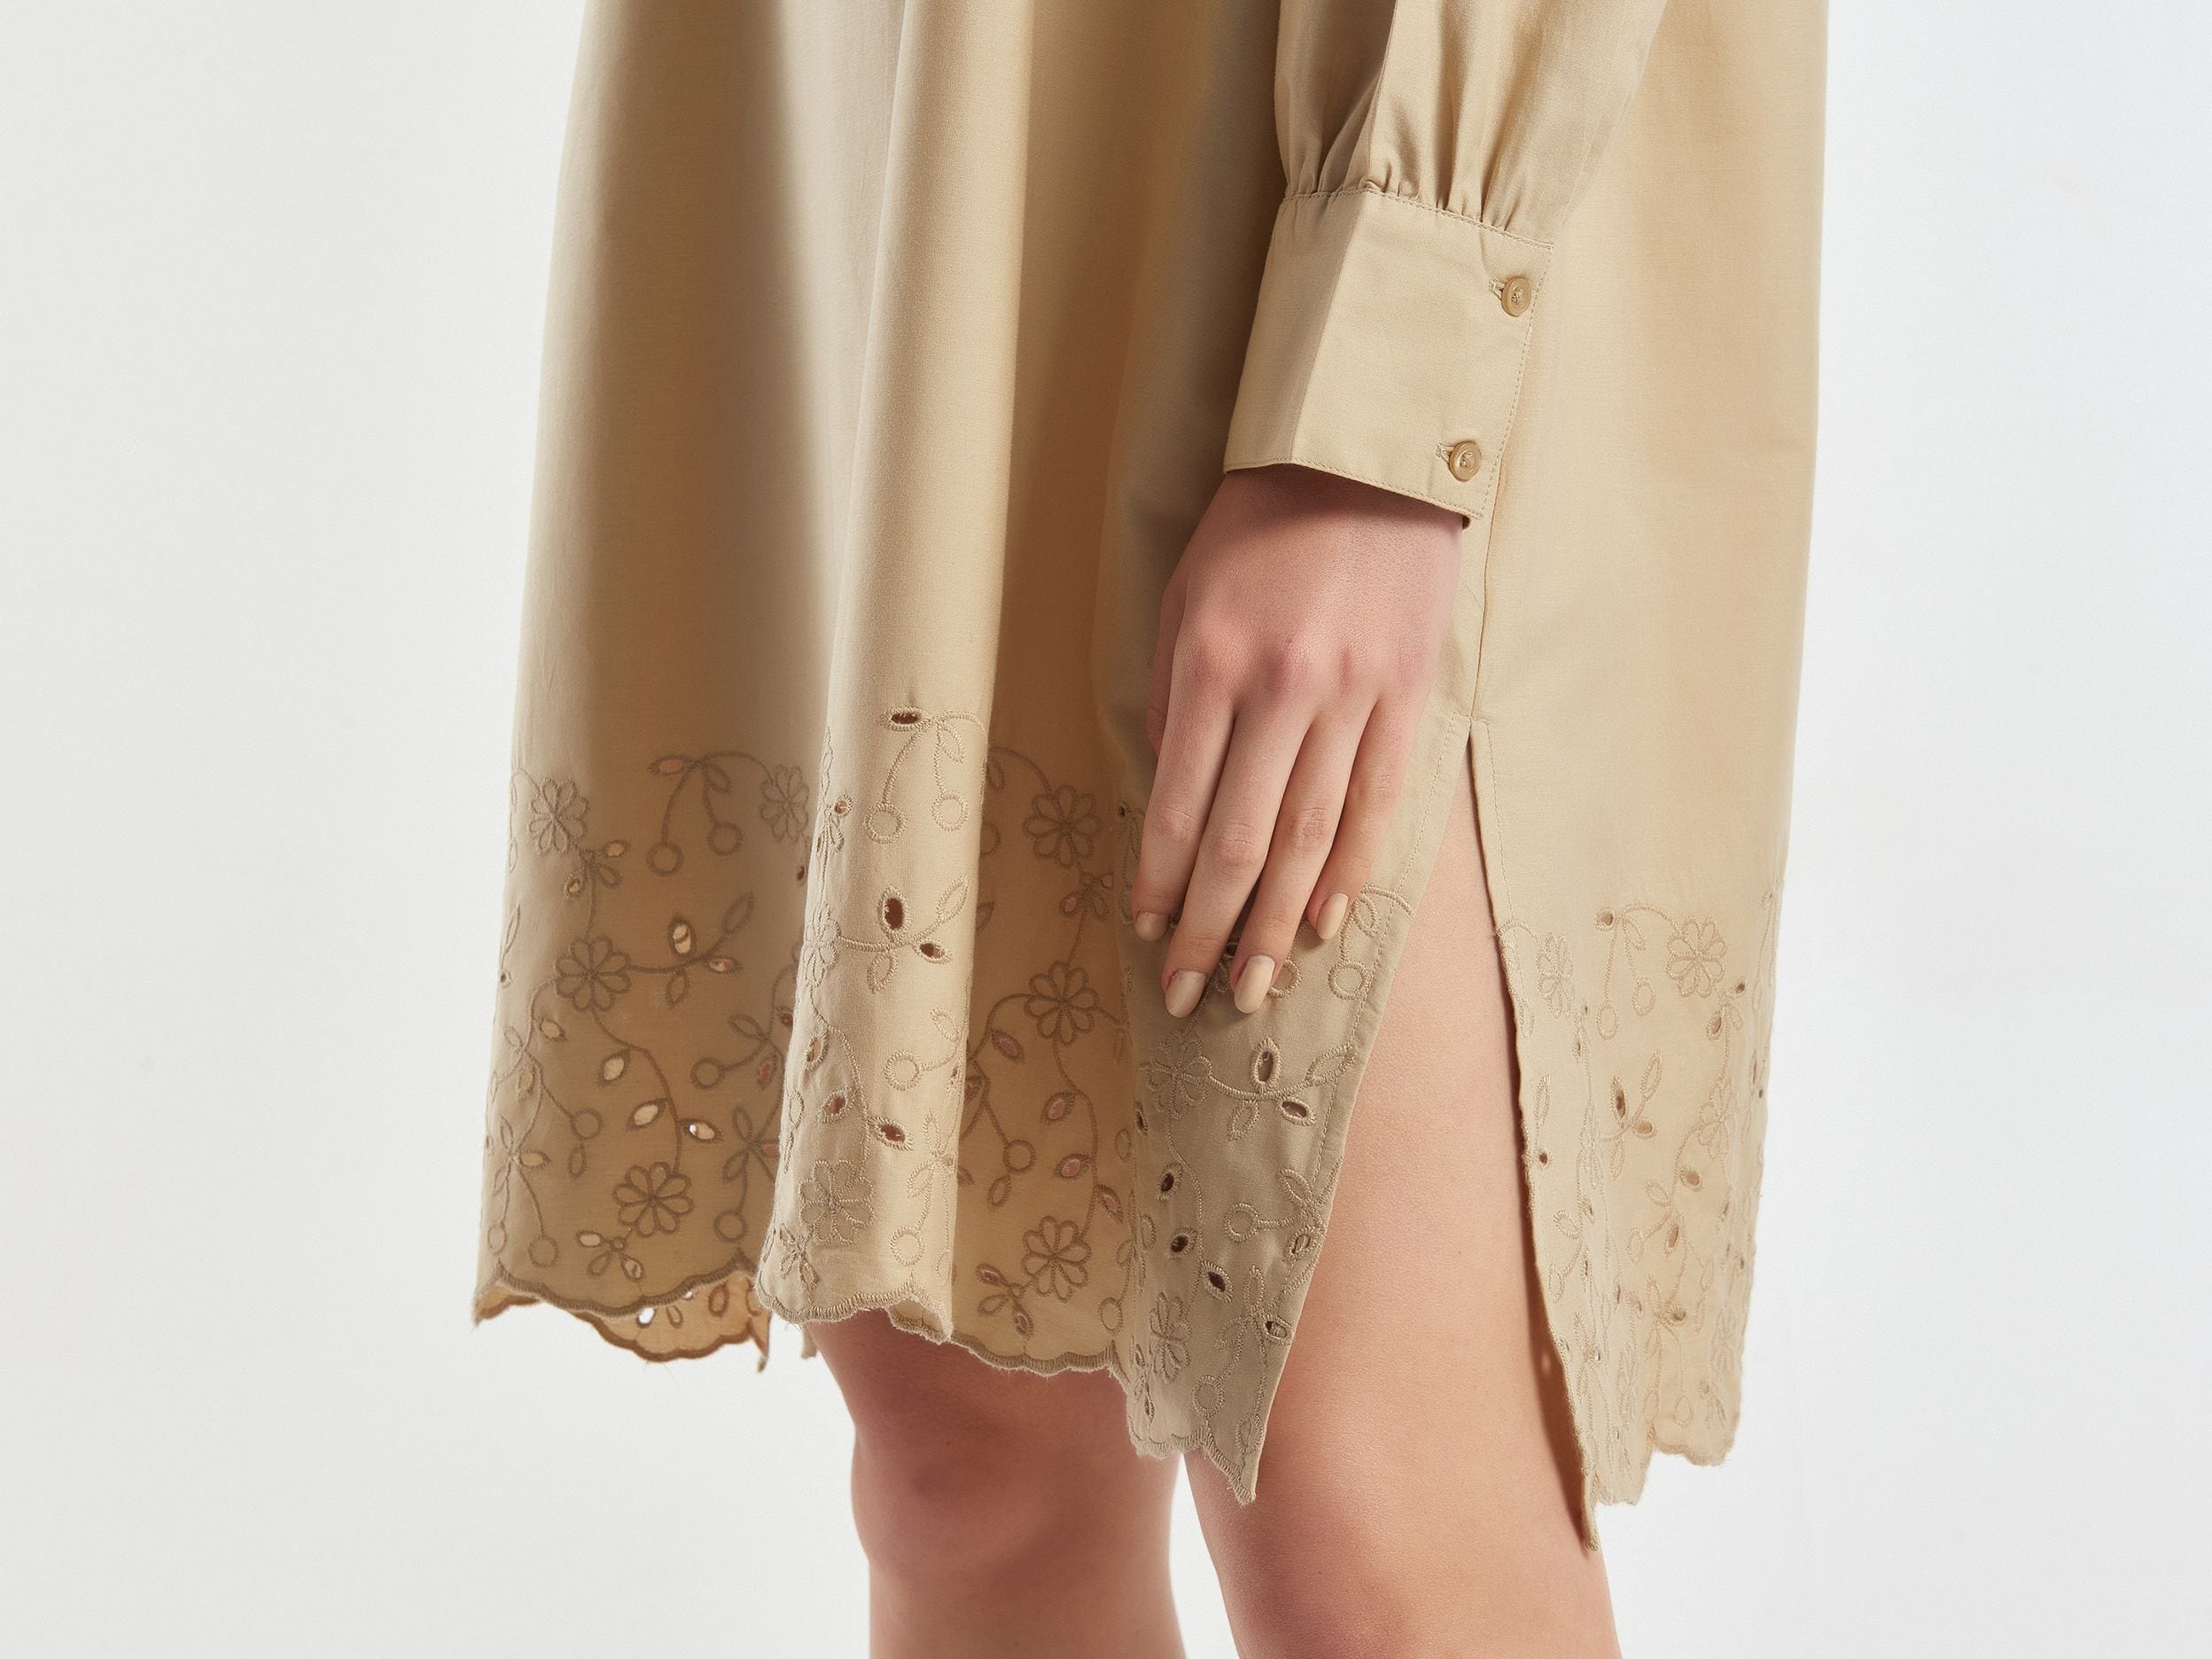 Shirt dress with broderie anglaise embroidery